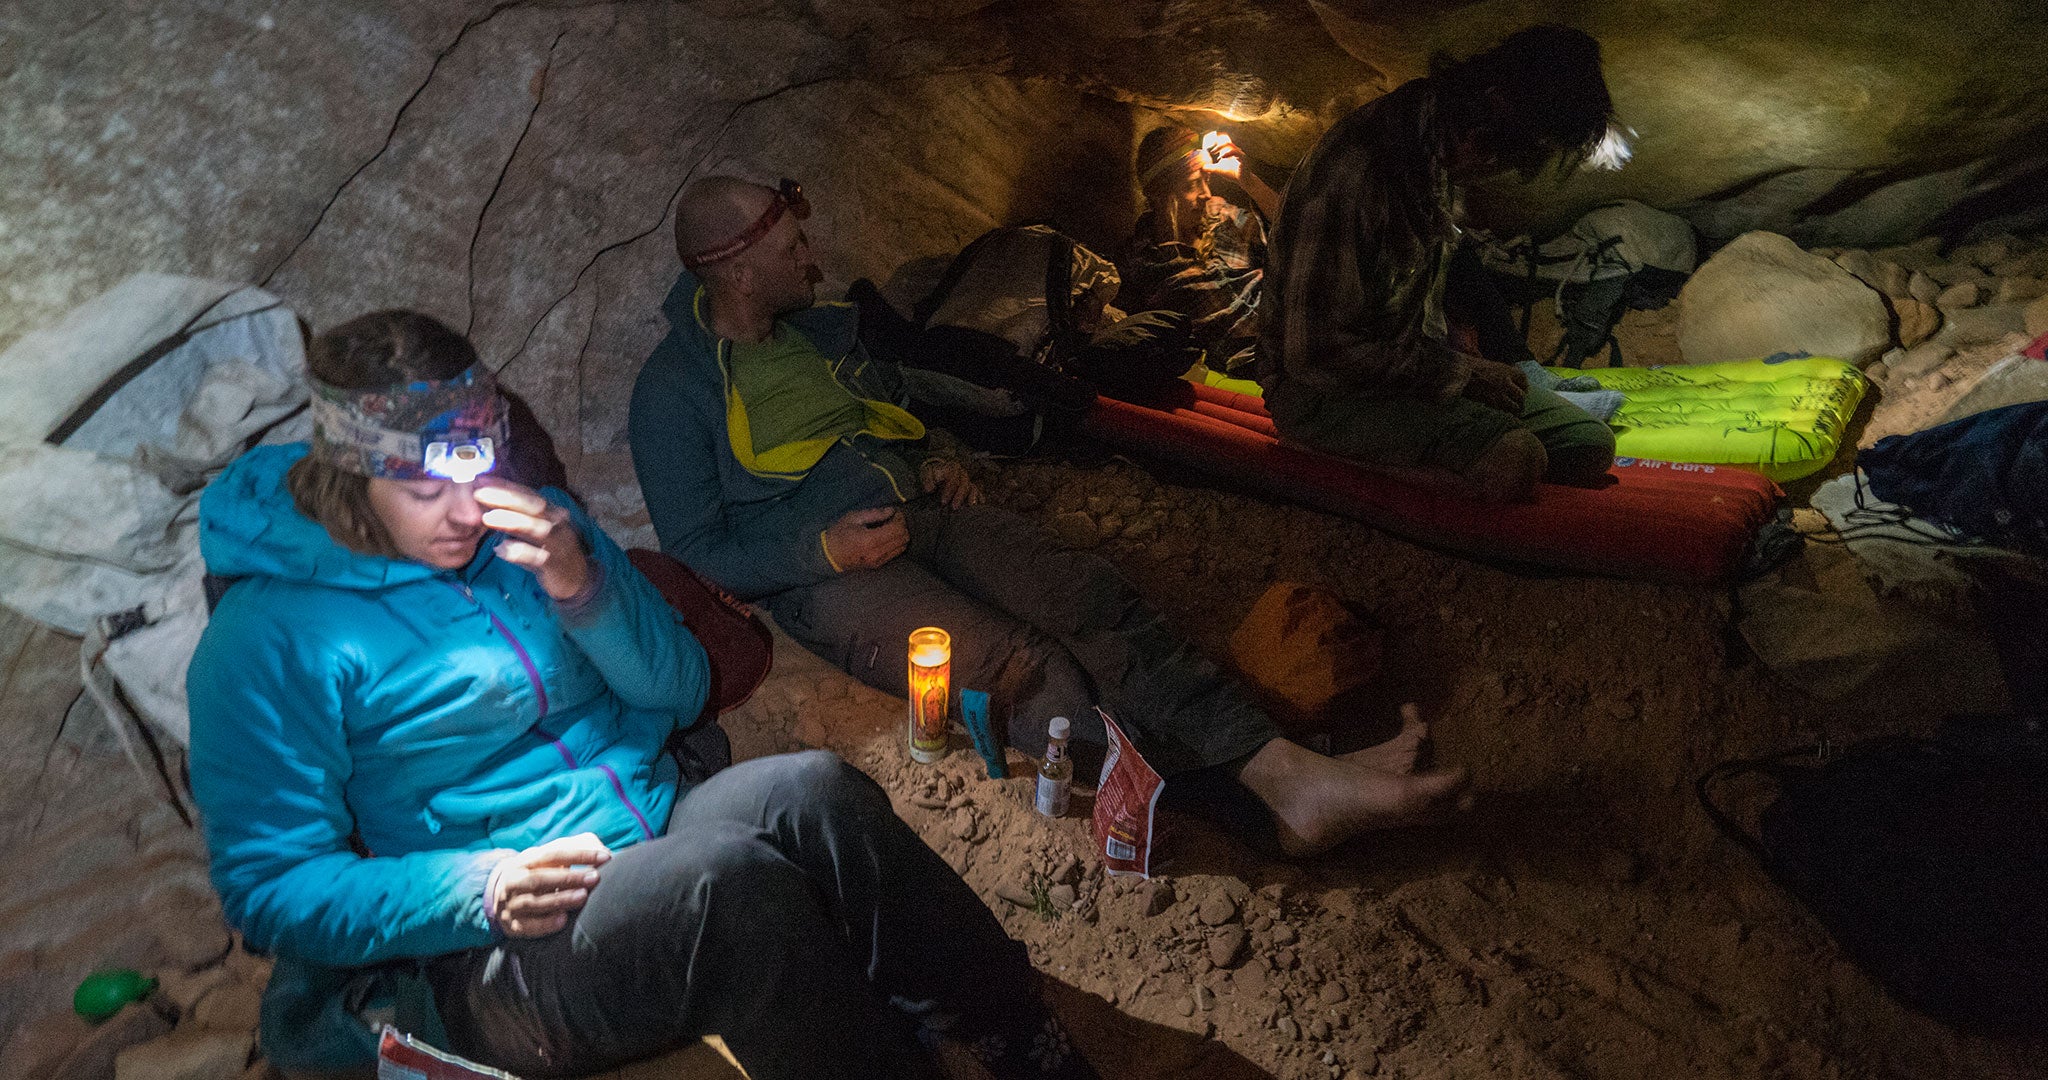 Camping inside a small cave